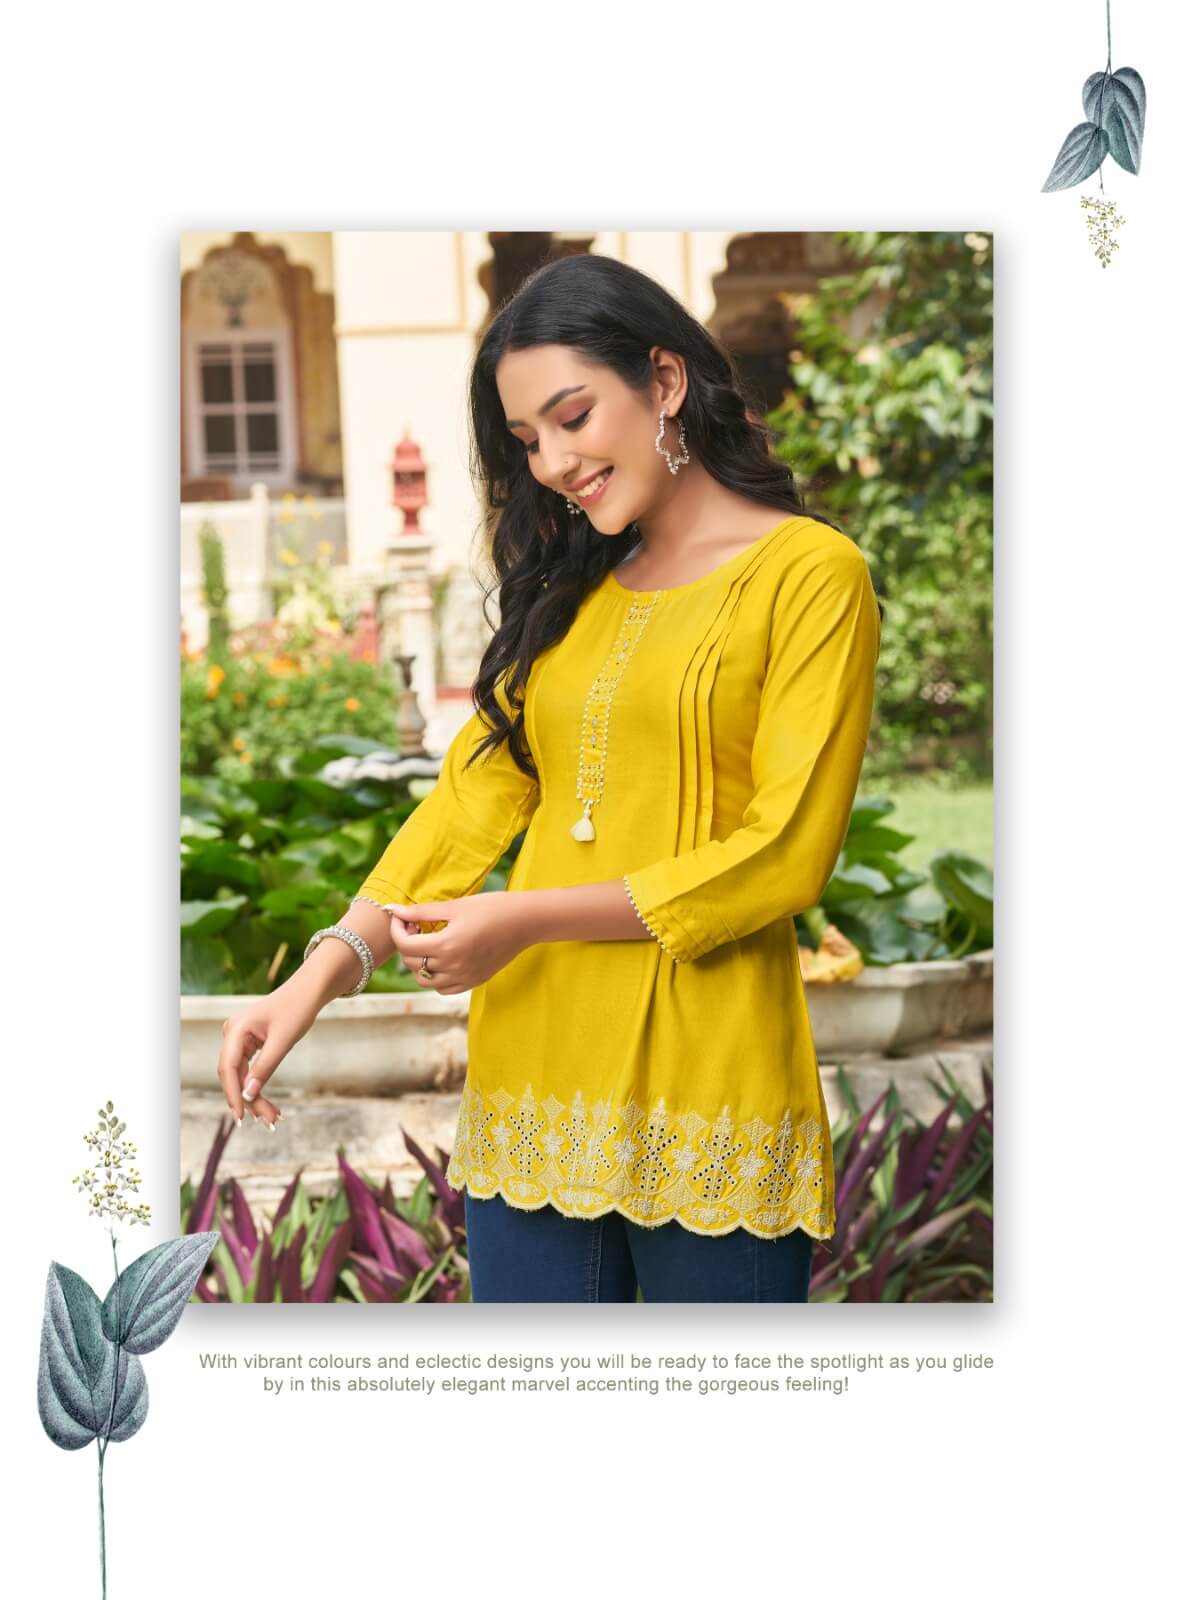 Heritage Cherry Rayon Ladies Tops Catalog collection 5